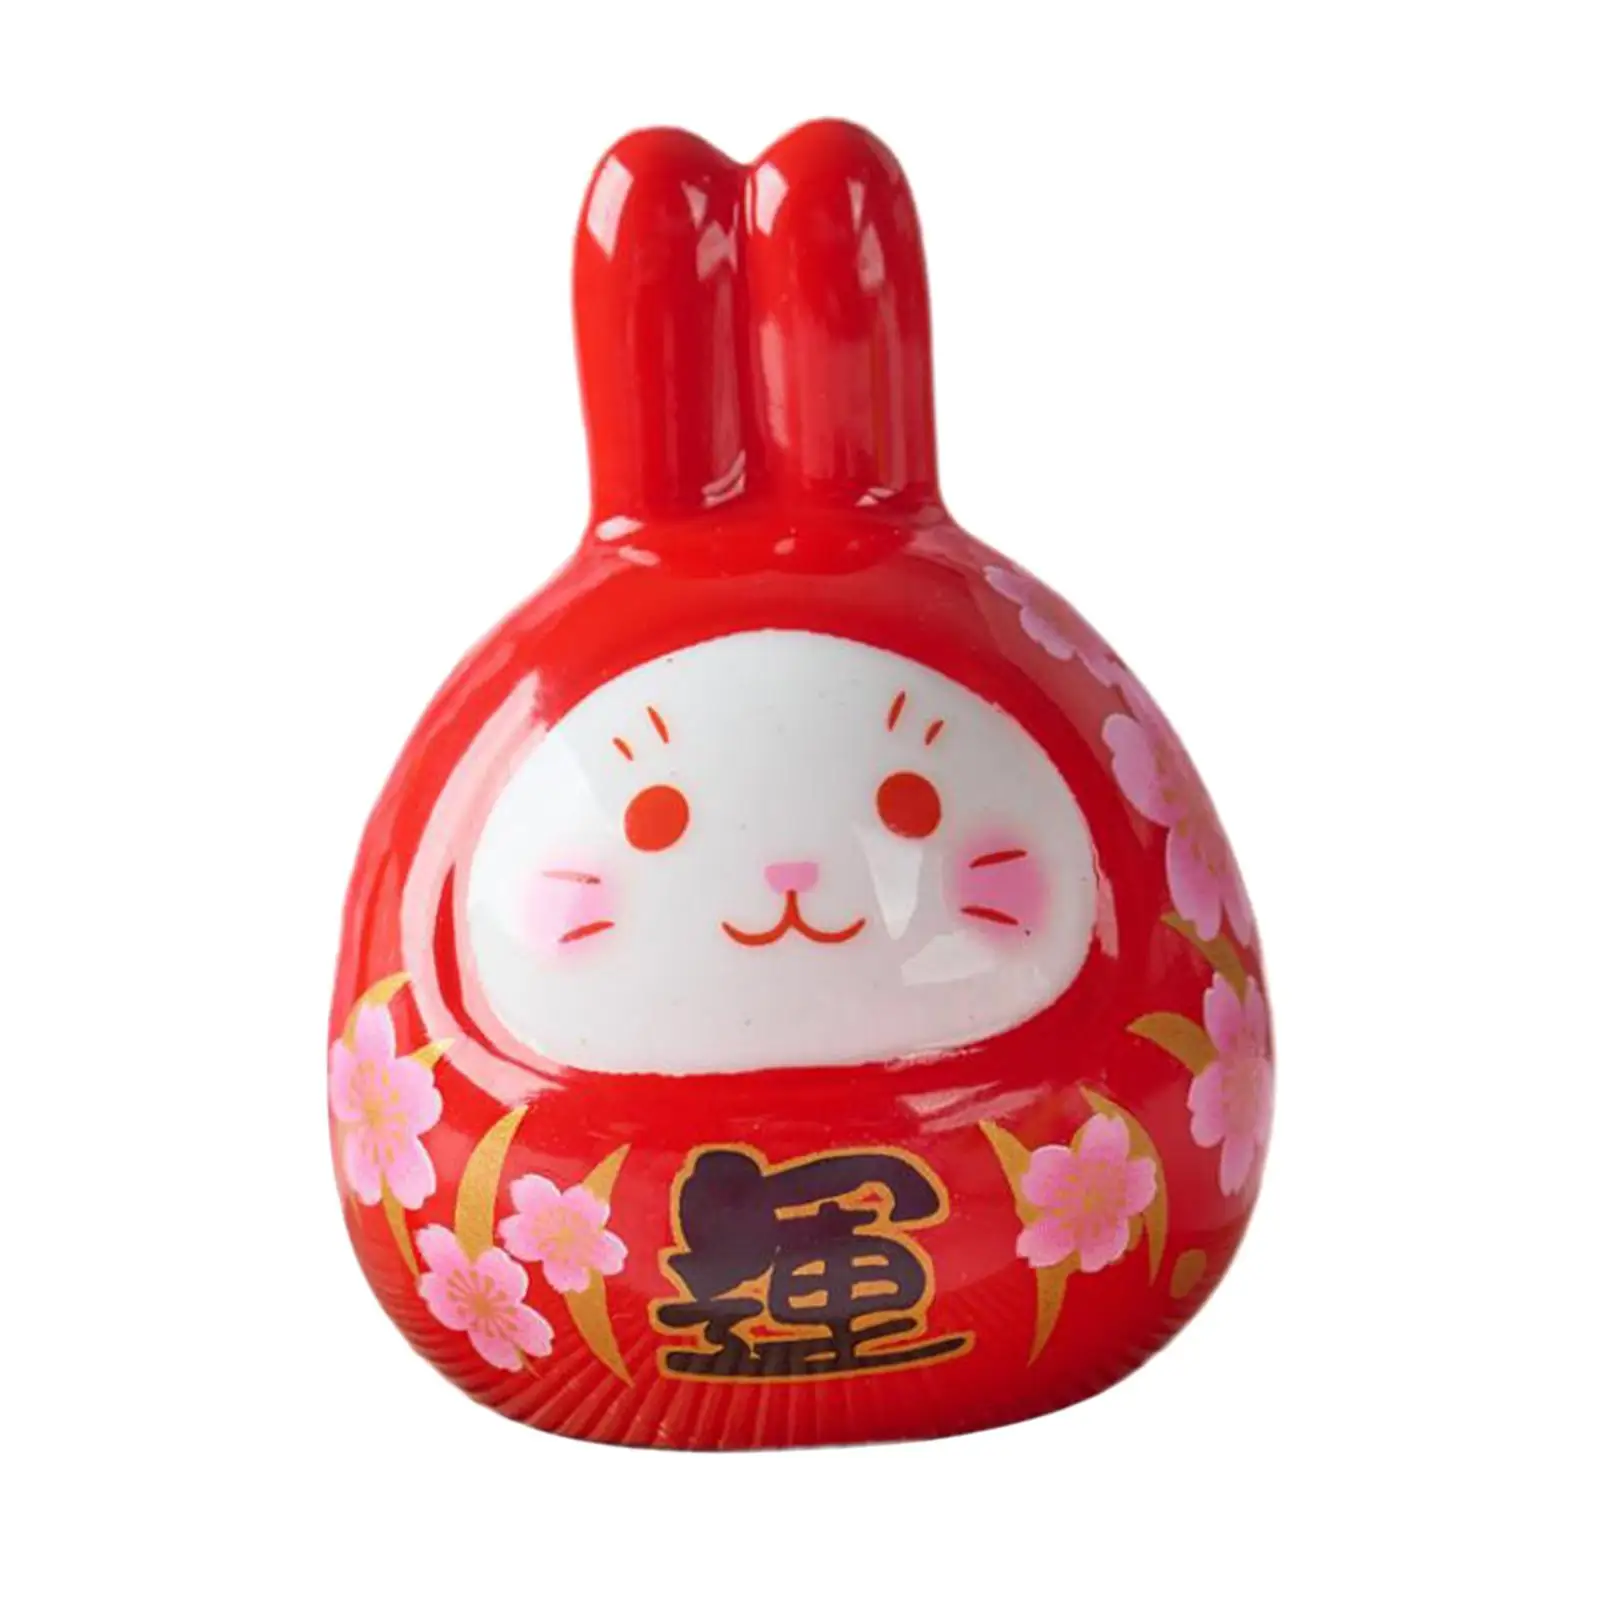 Chinese New Year Rabbit Statue Ceramic Miniature Craft for Office Spring Festival Decor